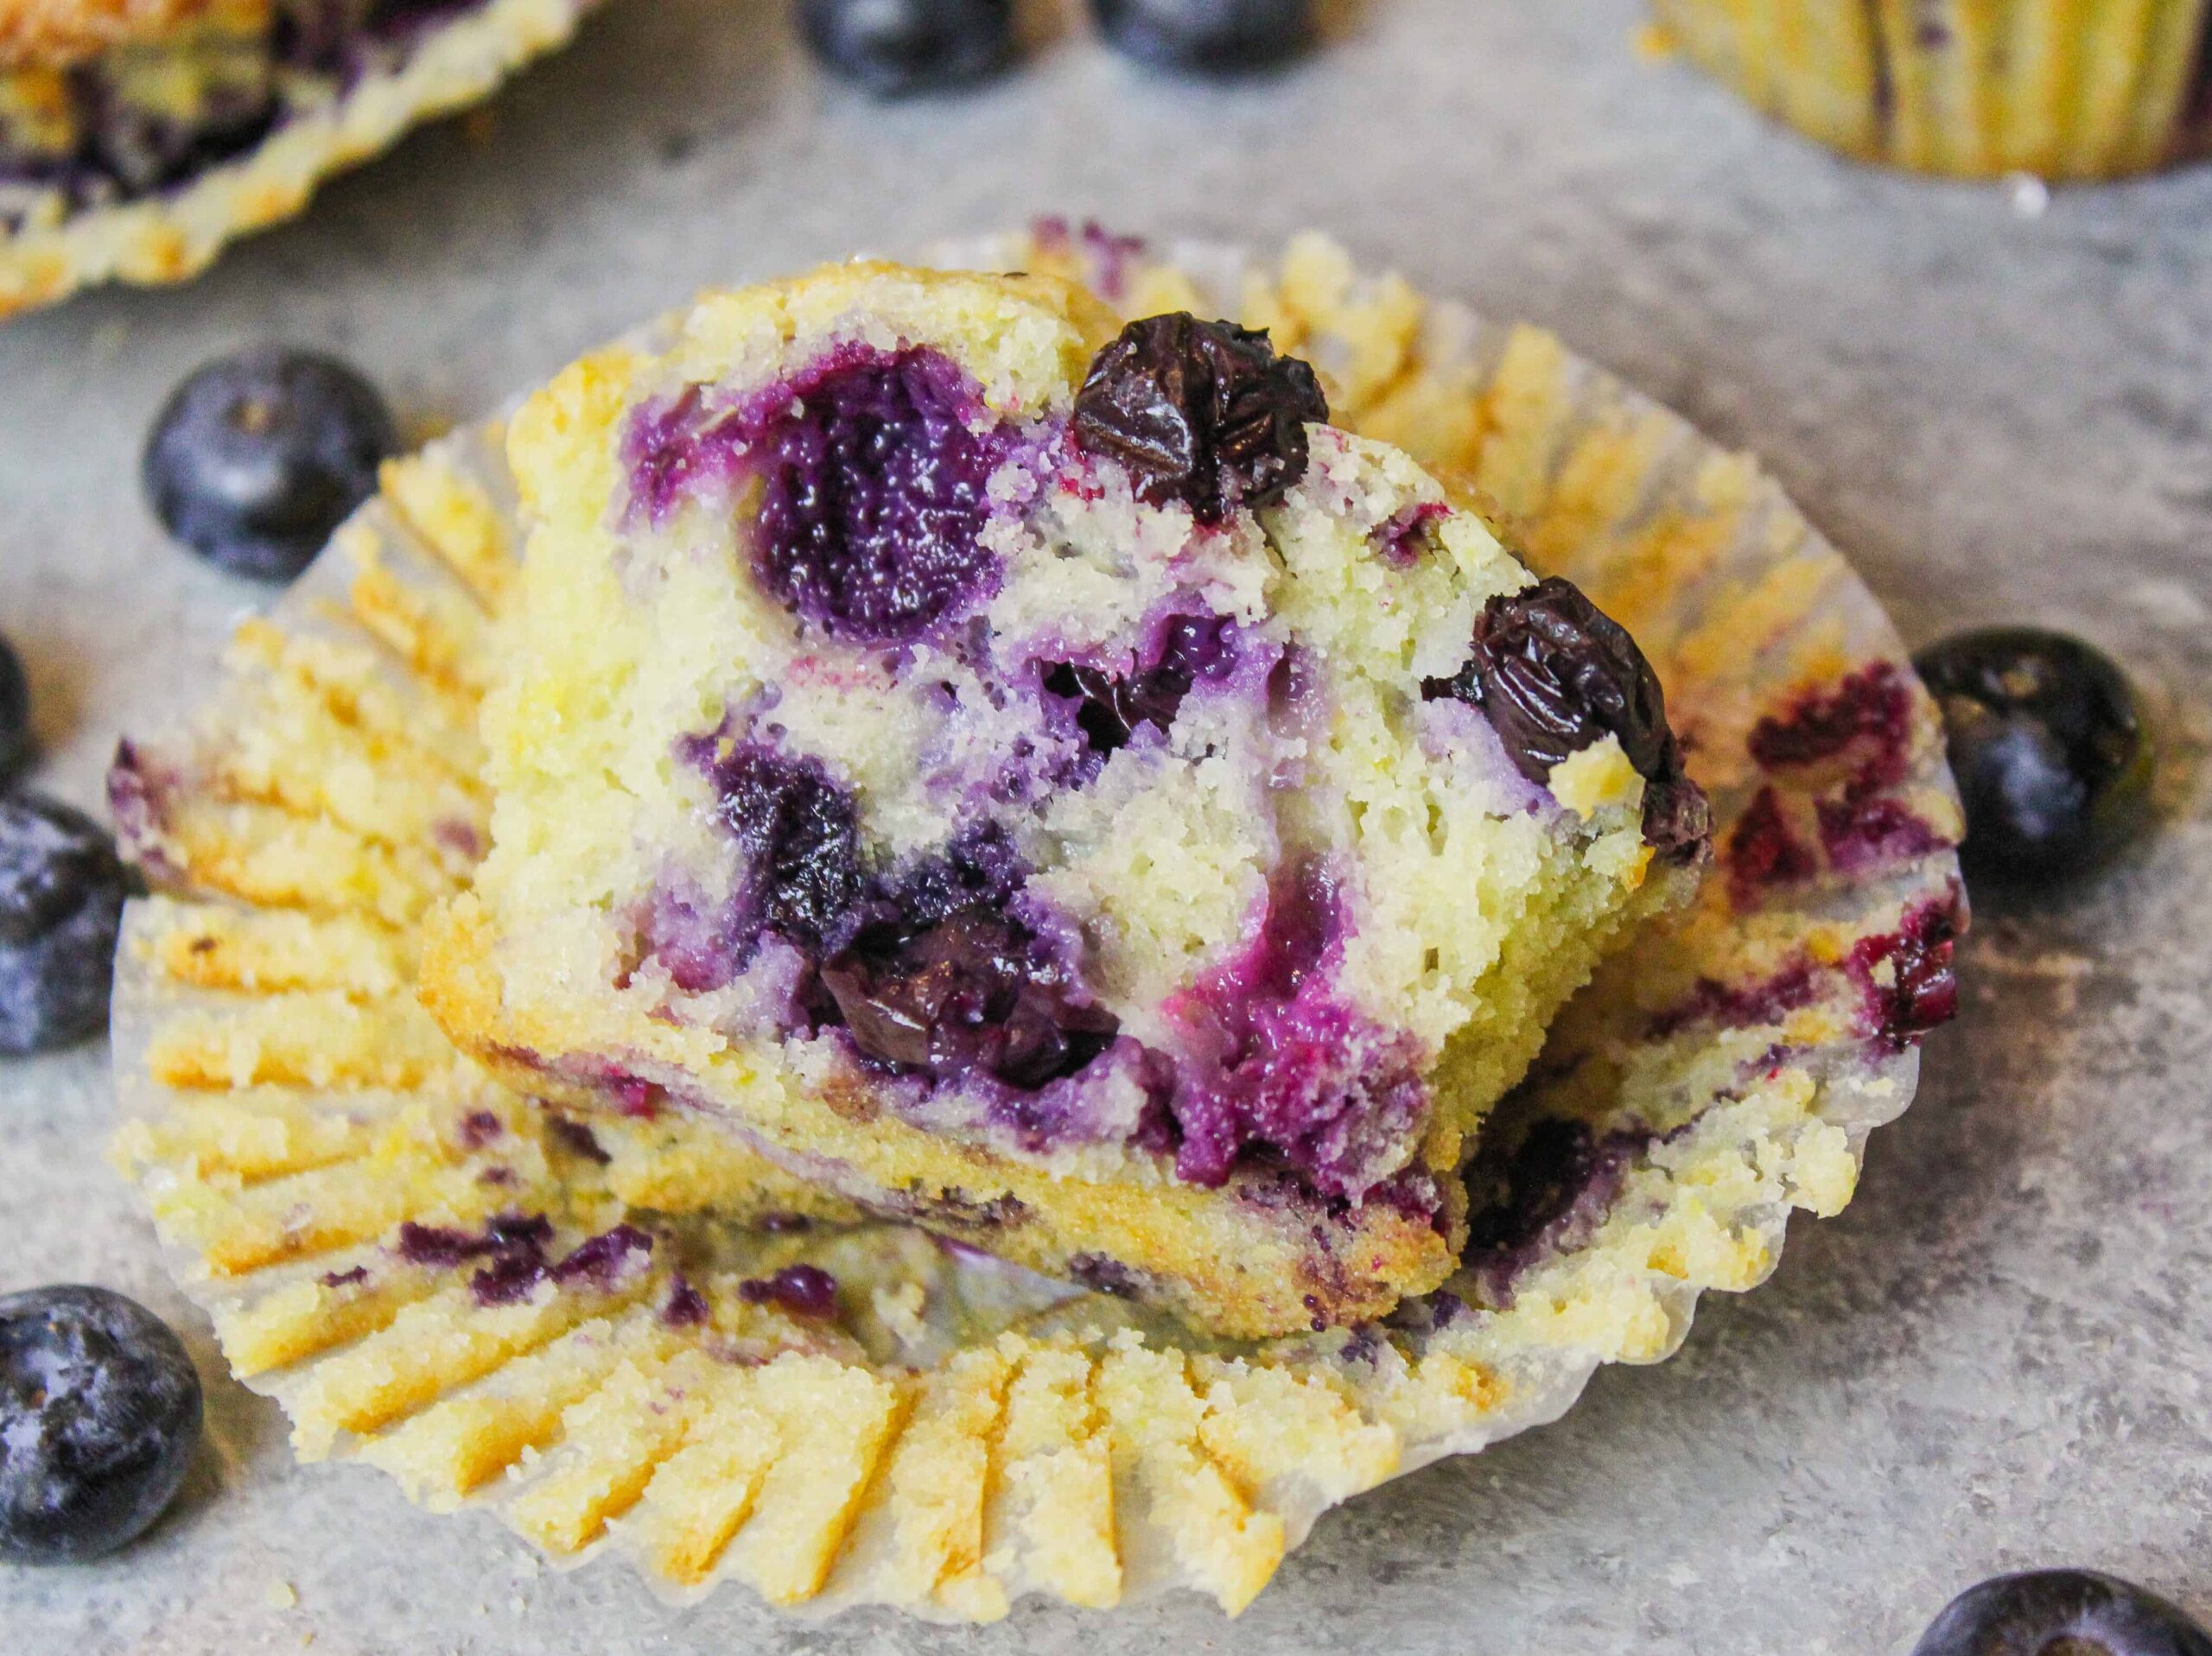 image of cut open blueberry muffin, showing moist, tender crumb and juicy blueberries